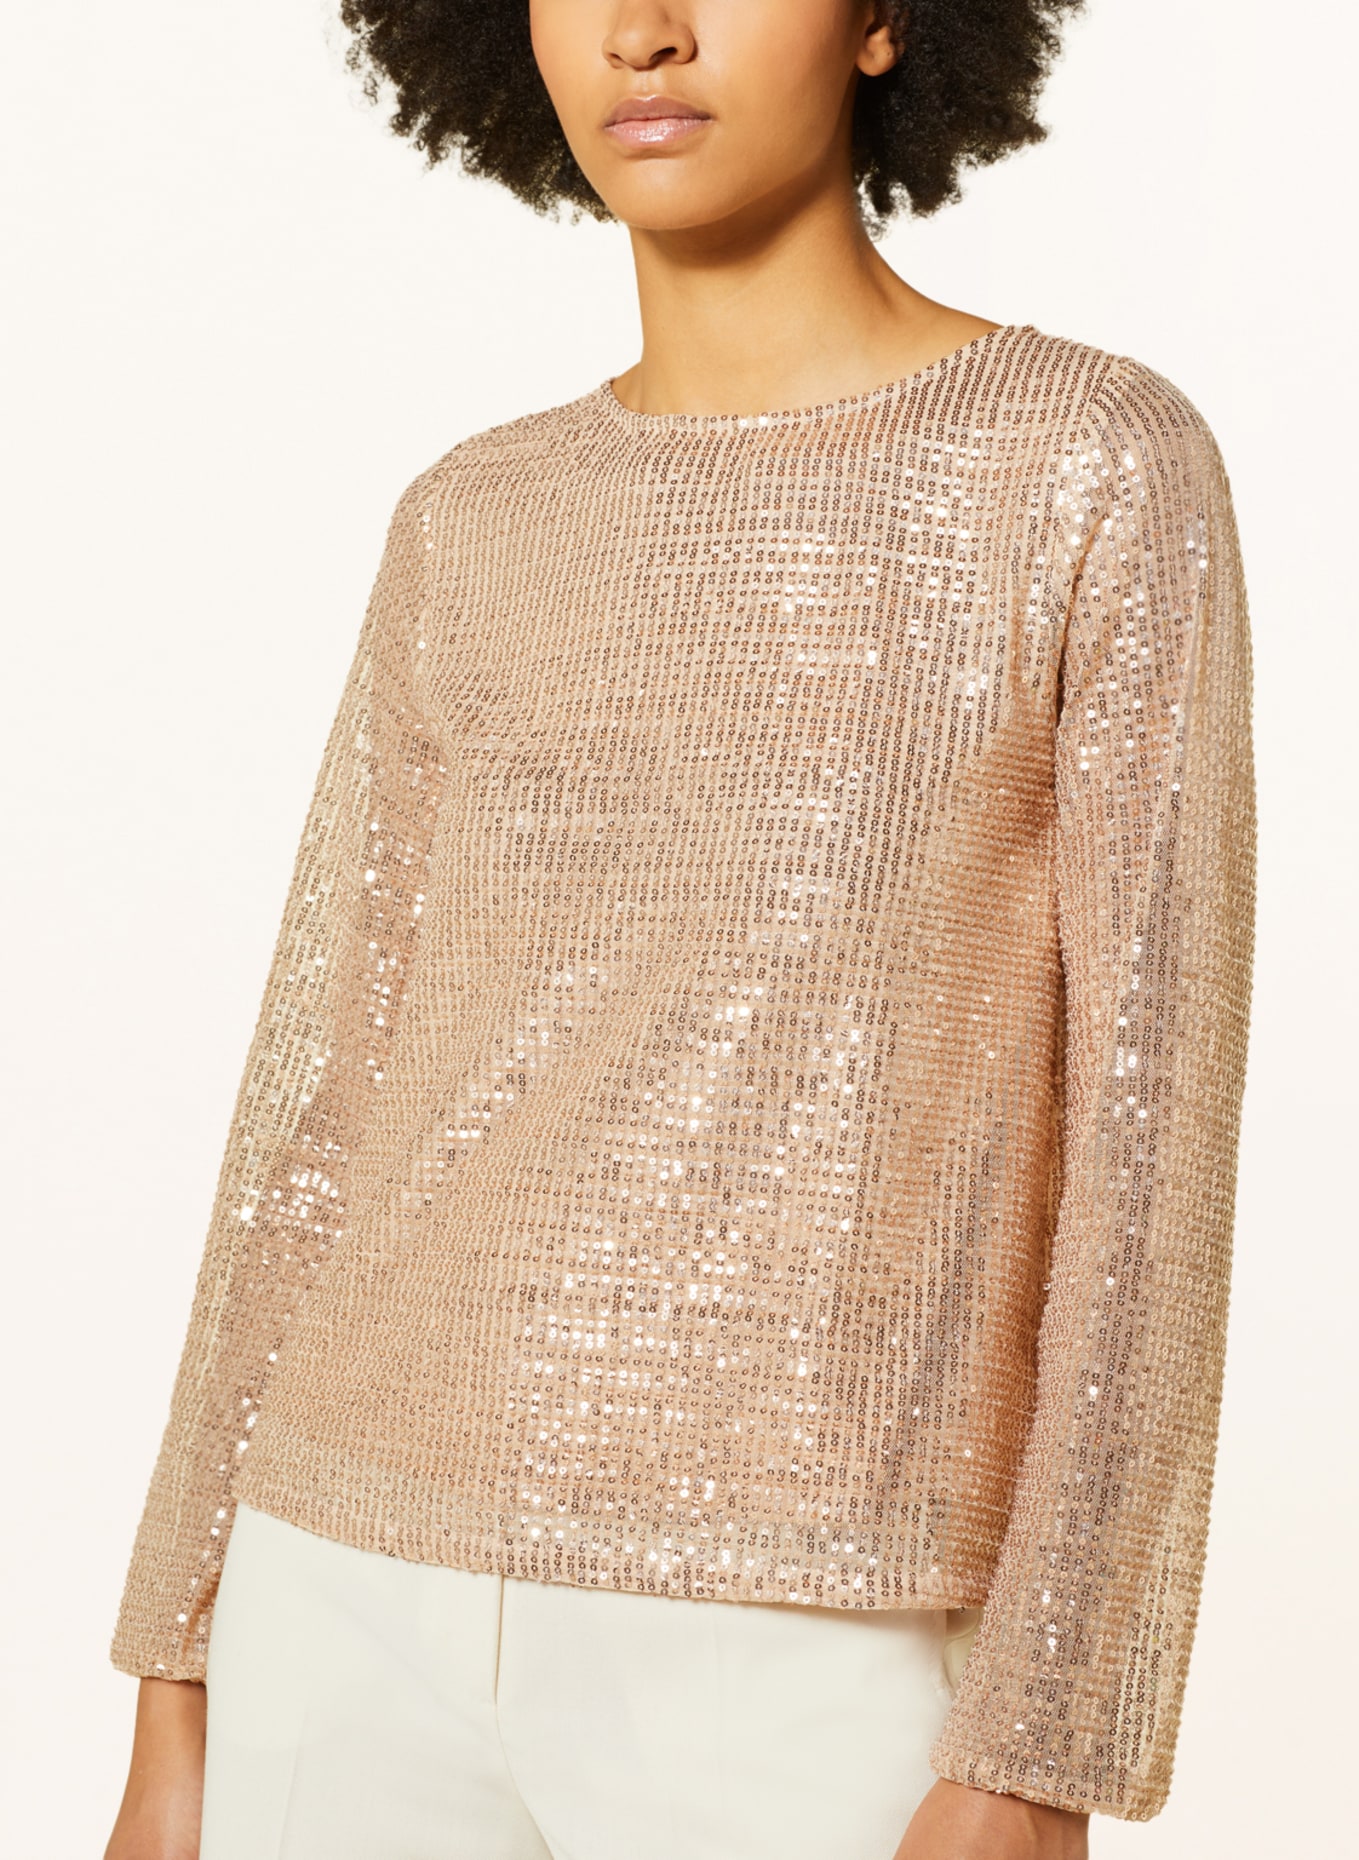 Princess GOES HOLLYWOOD Shirt blouse made of mesh with sequins, Color: LIGHT ORANGE (Image 4)